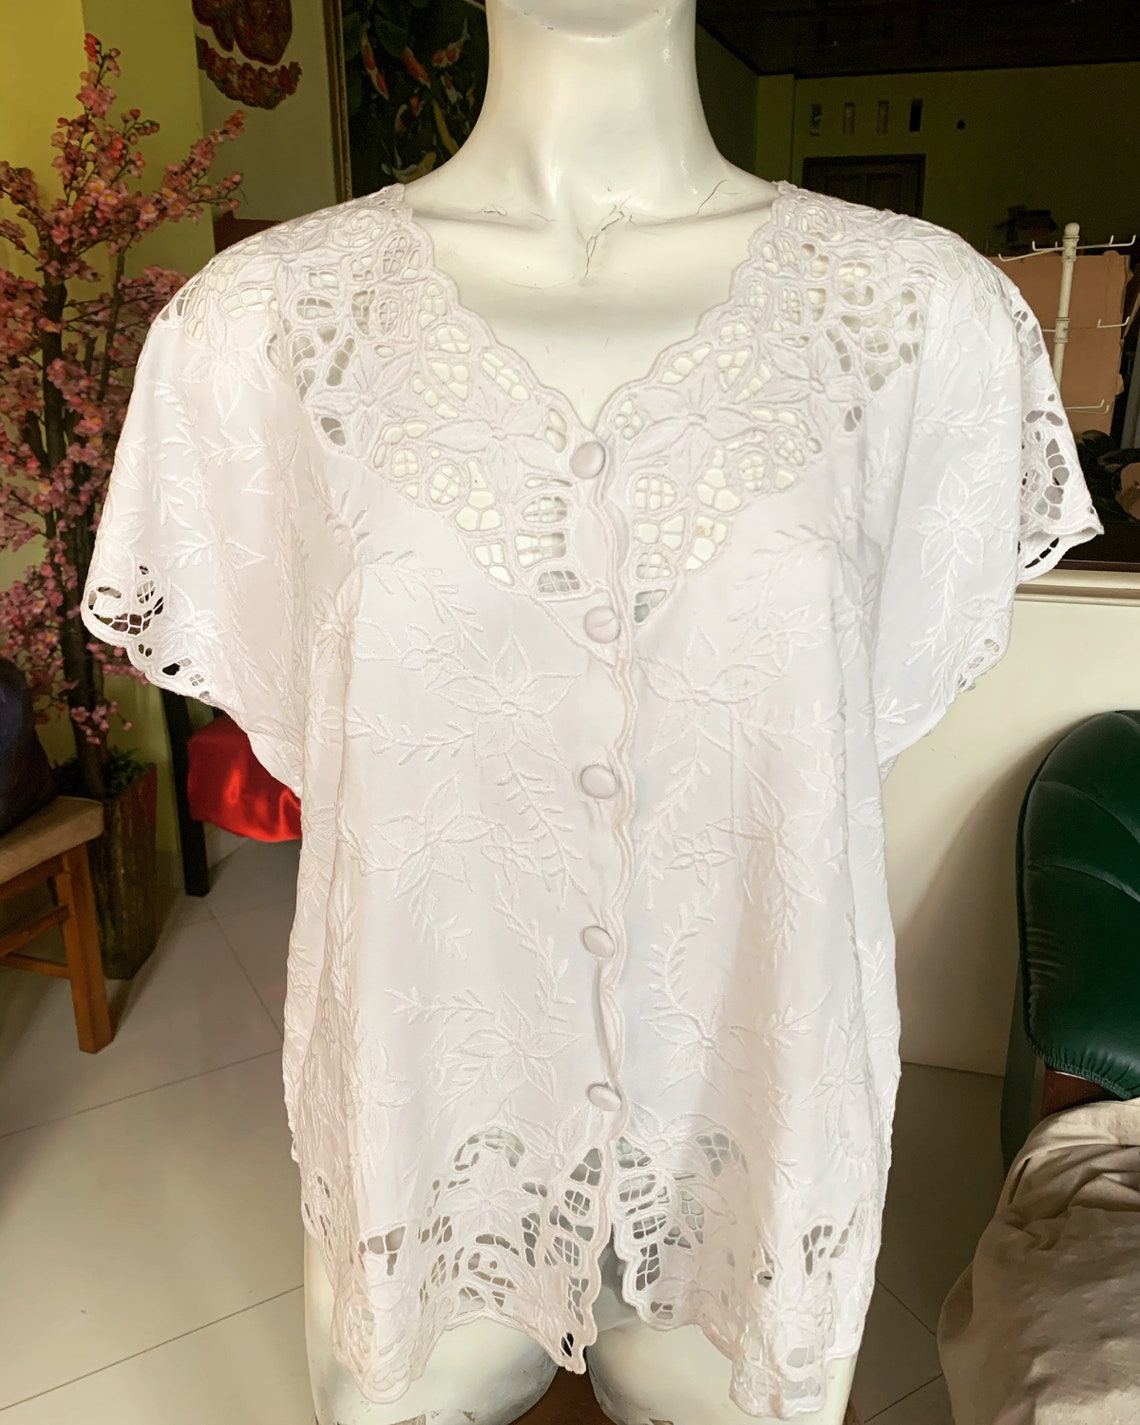 Embroidery blouses Bali cutwork plus size top | Etsy